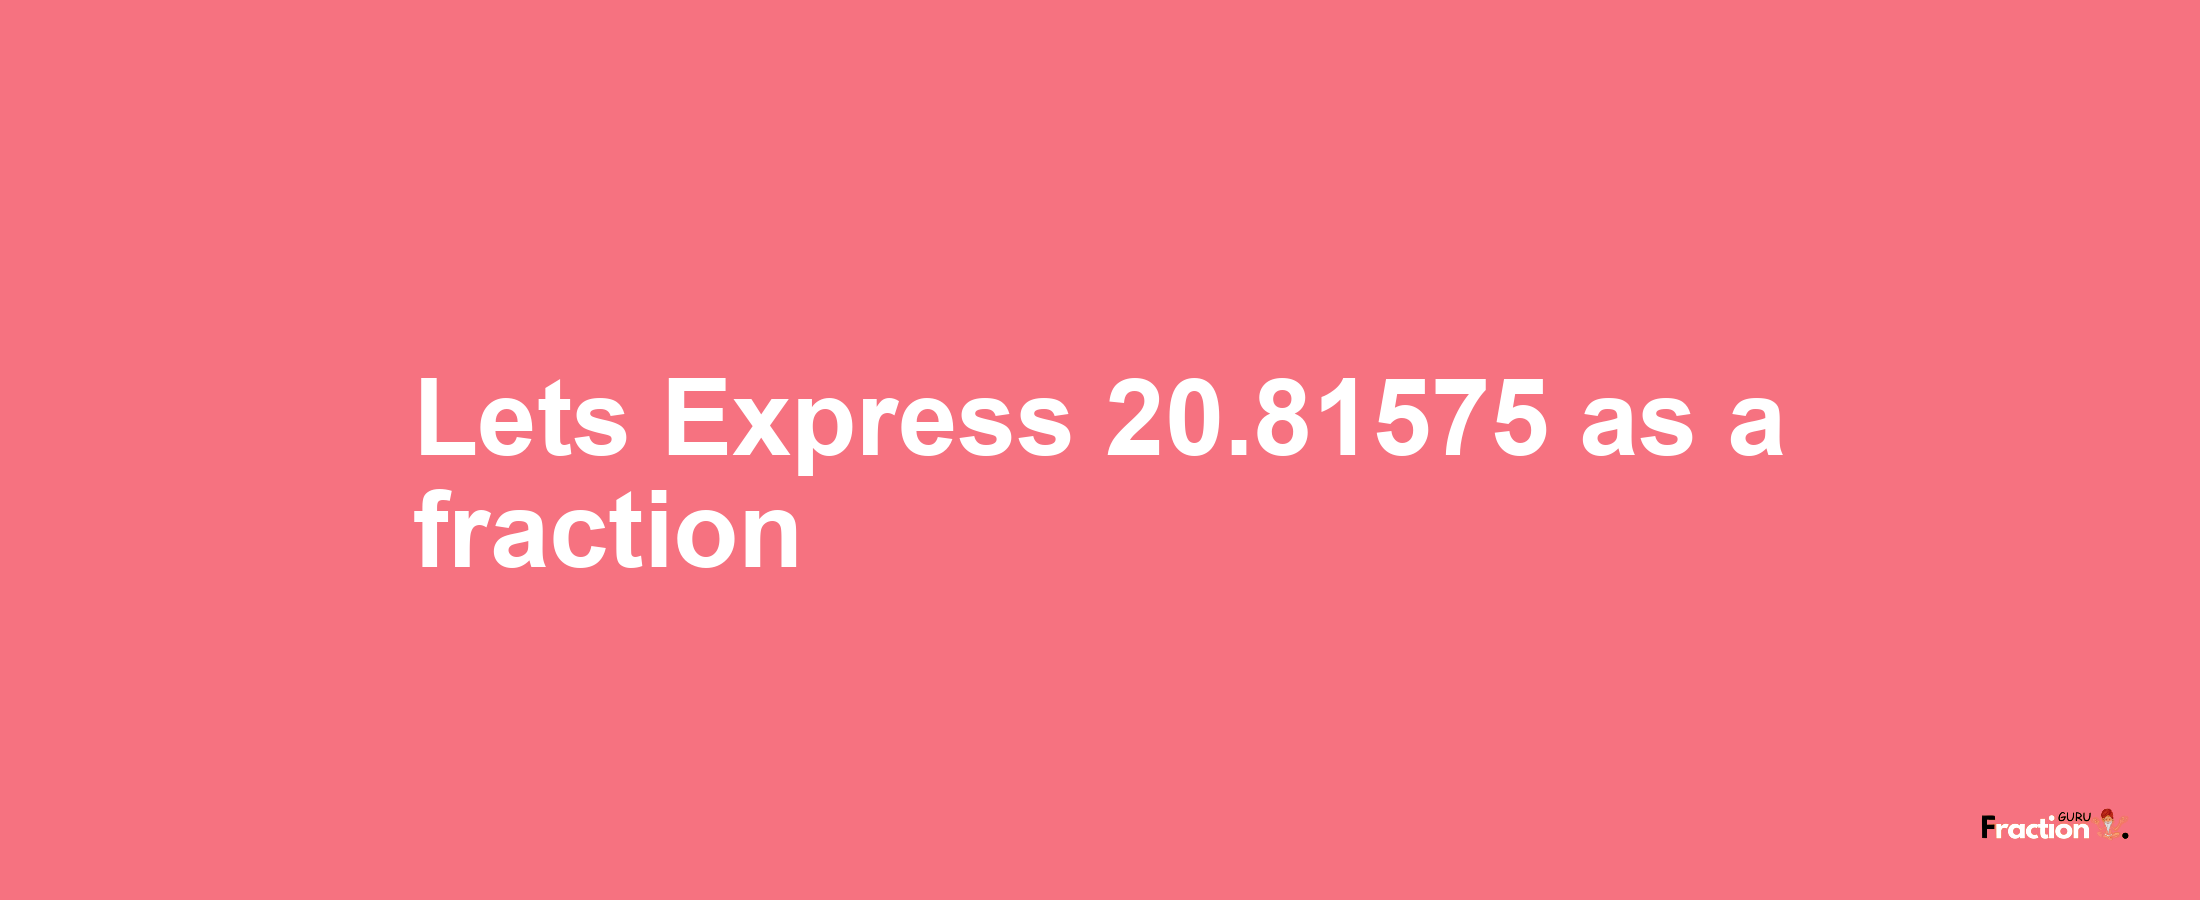 Lets Express 20.81575 as afraction